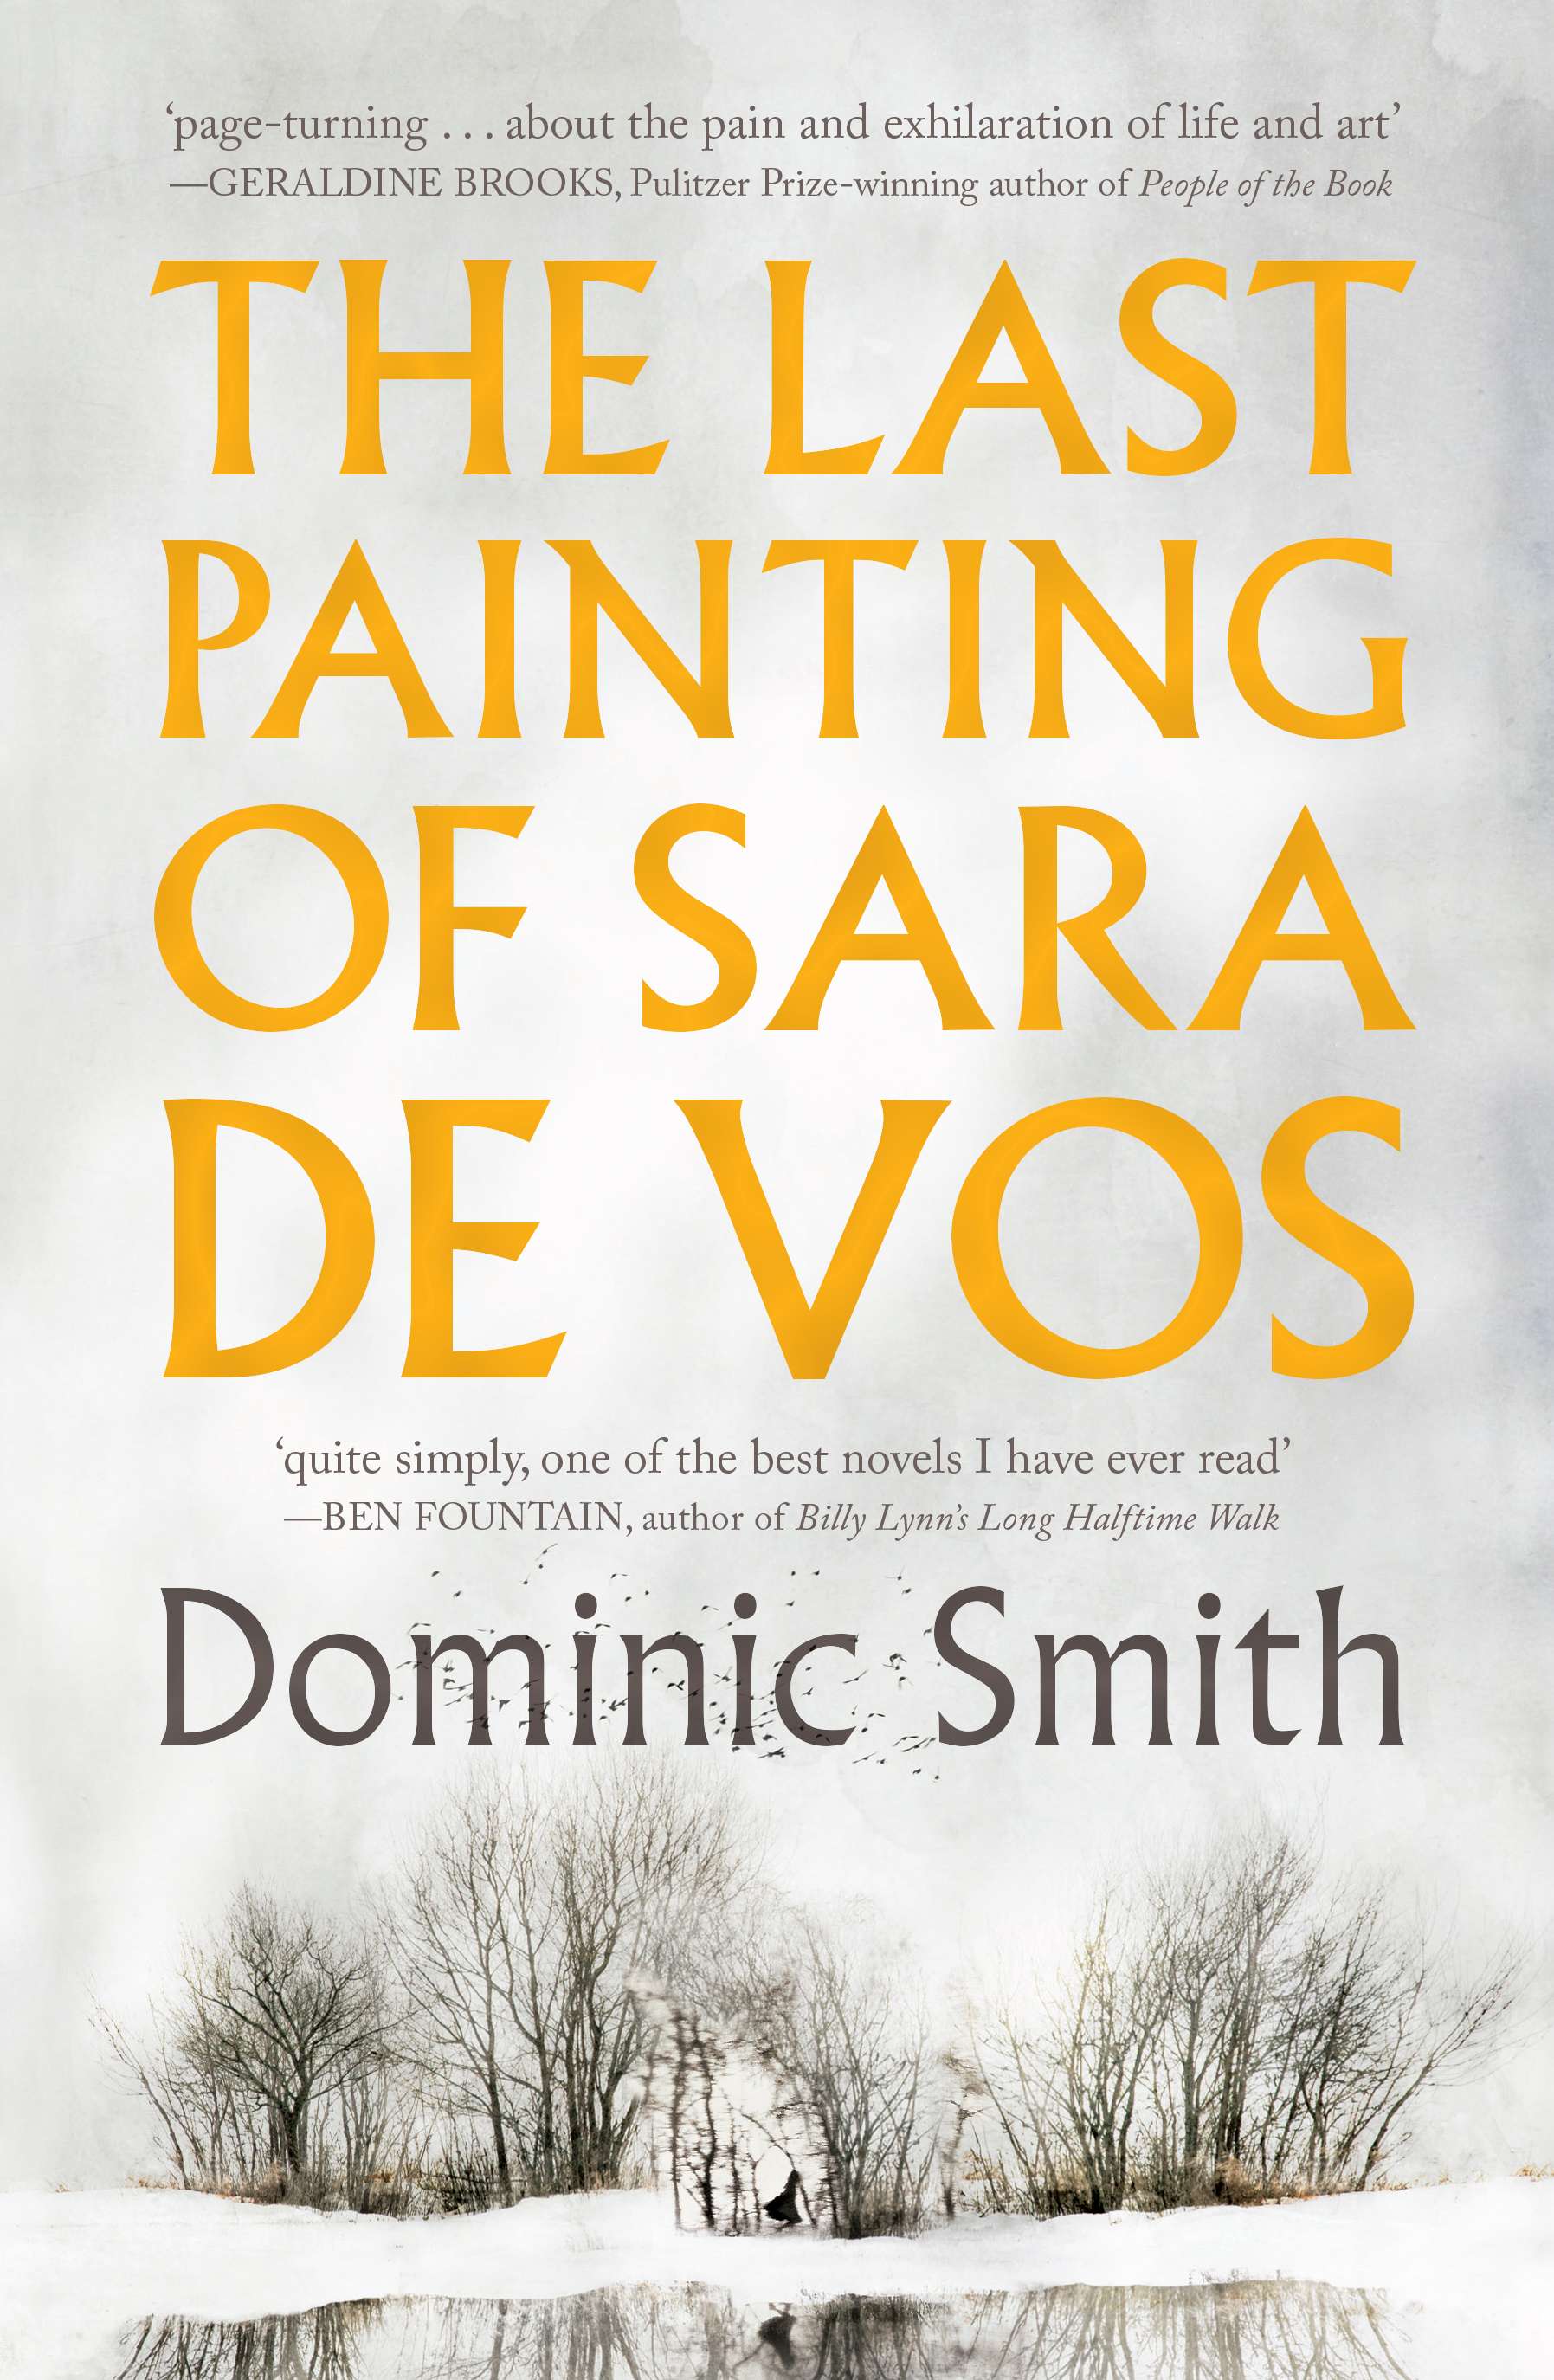 The Last Painting of Sara de Vos by Dominic Smith book cover featuring a snowy landscape with sparse trees, a white sky